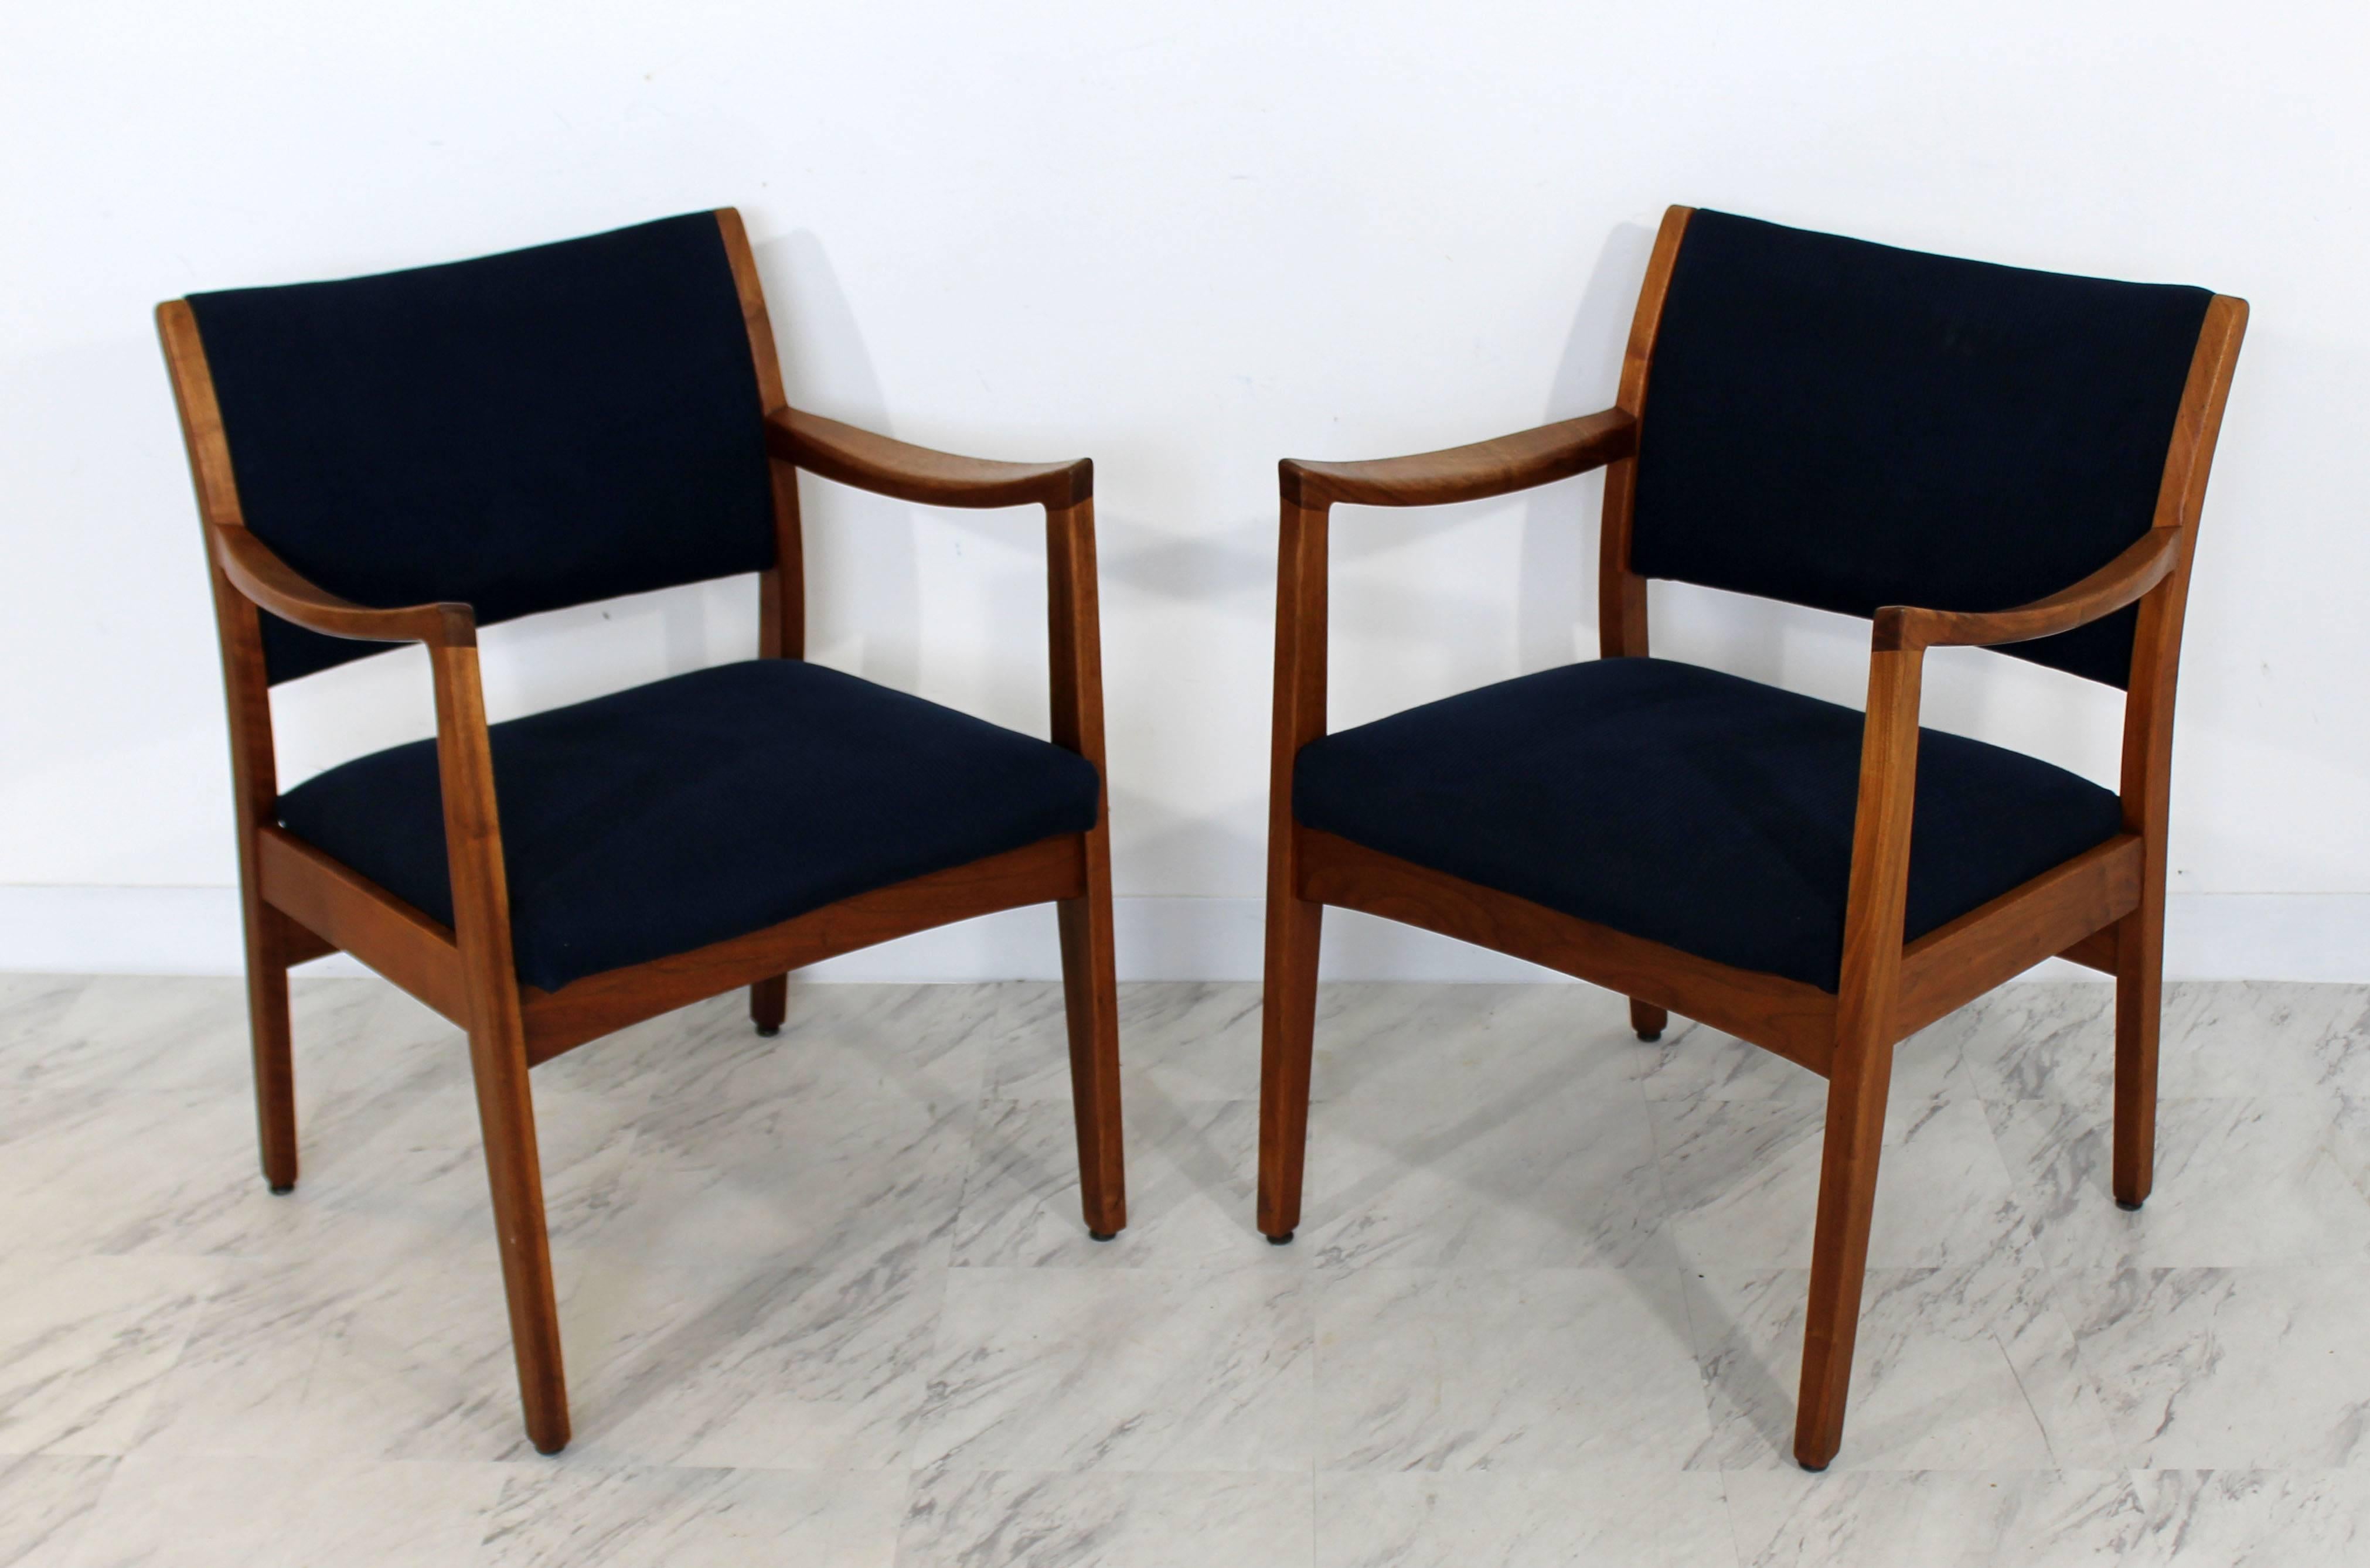 For your consideration is a gorgeous pair of walnut armchairs, by Johnson Furniture Co, circa the 1960s. In excellent condition. The dimensions are 23.5